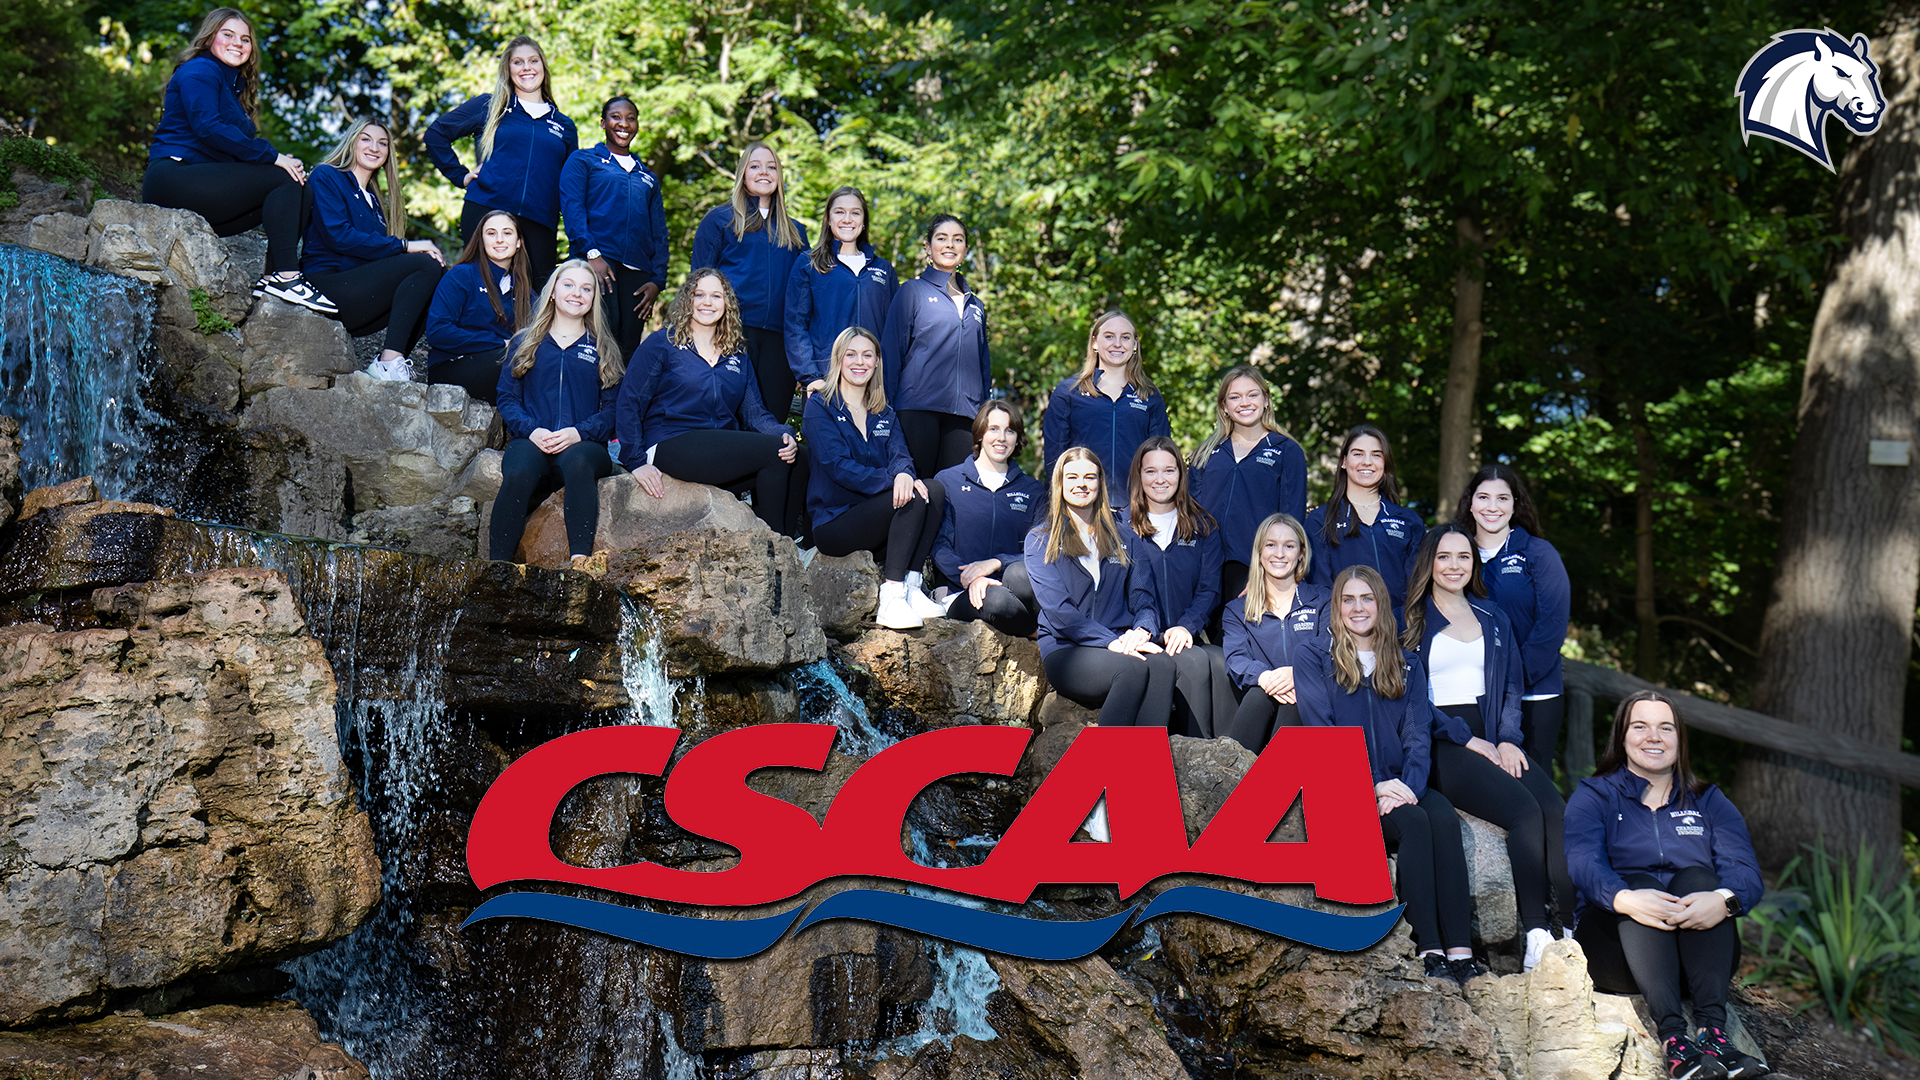 Chargers women's swim team earns 16th straight Scholar All-American honors from CSCAA